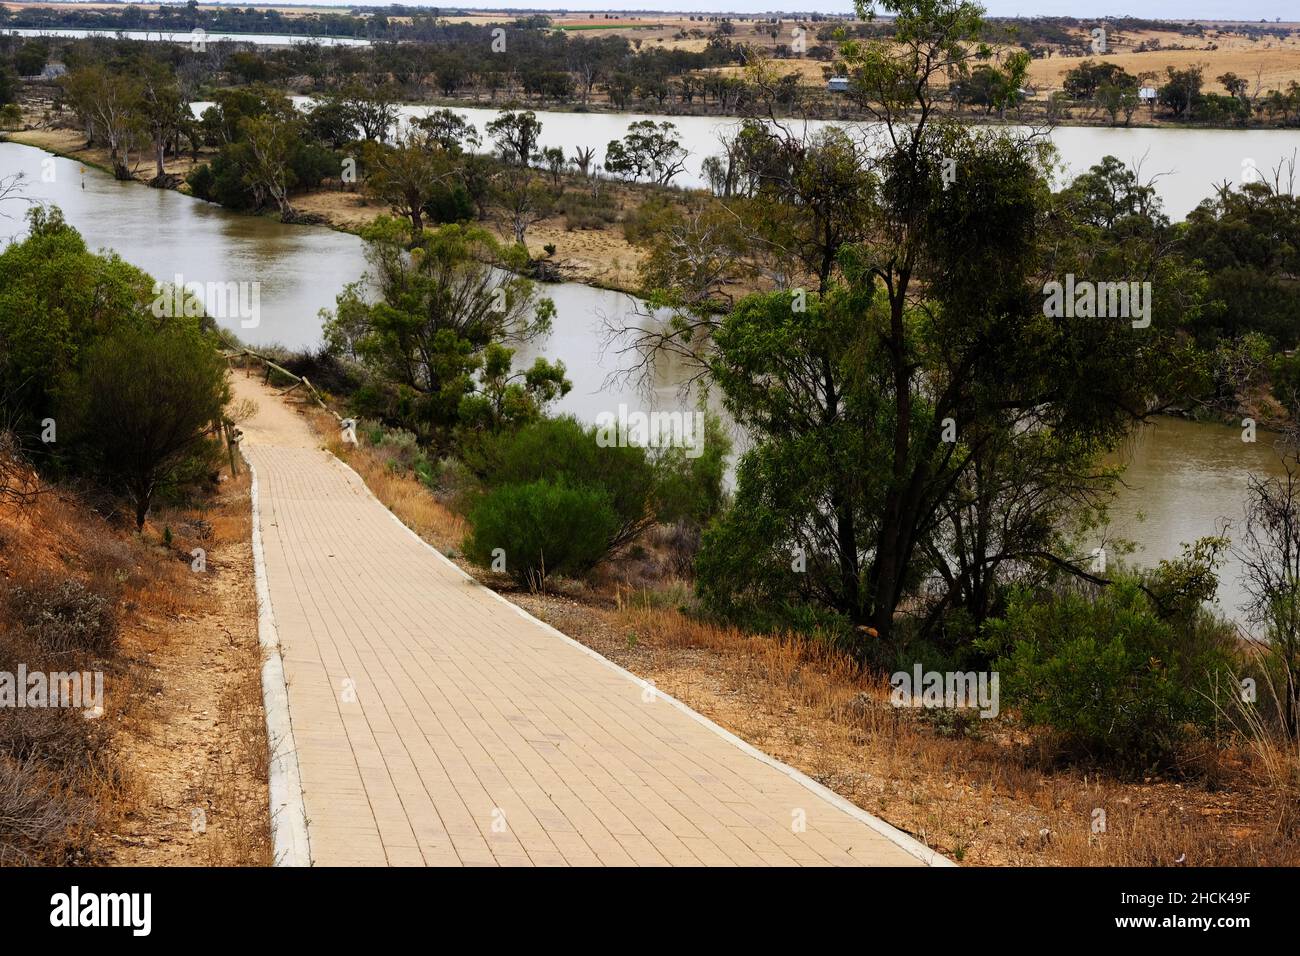 Part of the Waikerie Cliff Top walk at Waikerie in South Australia Stock Photo